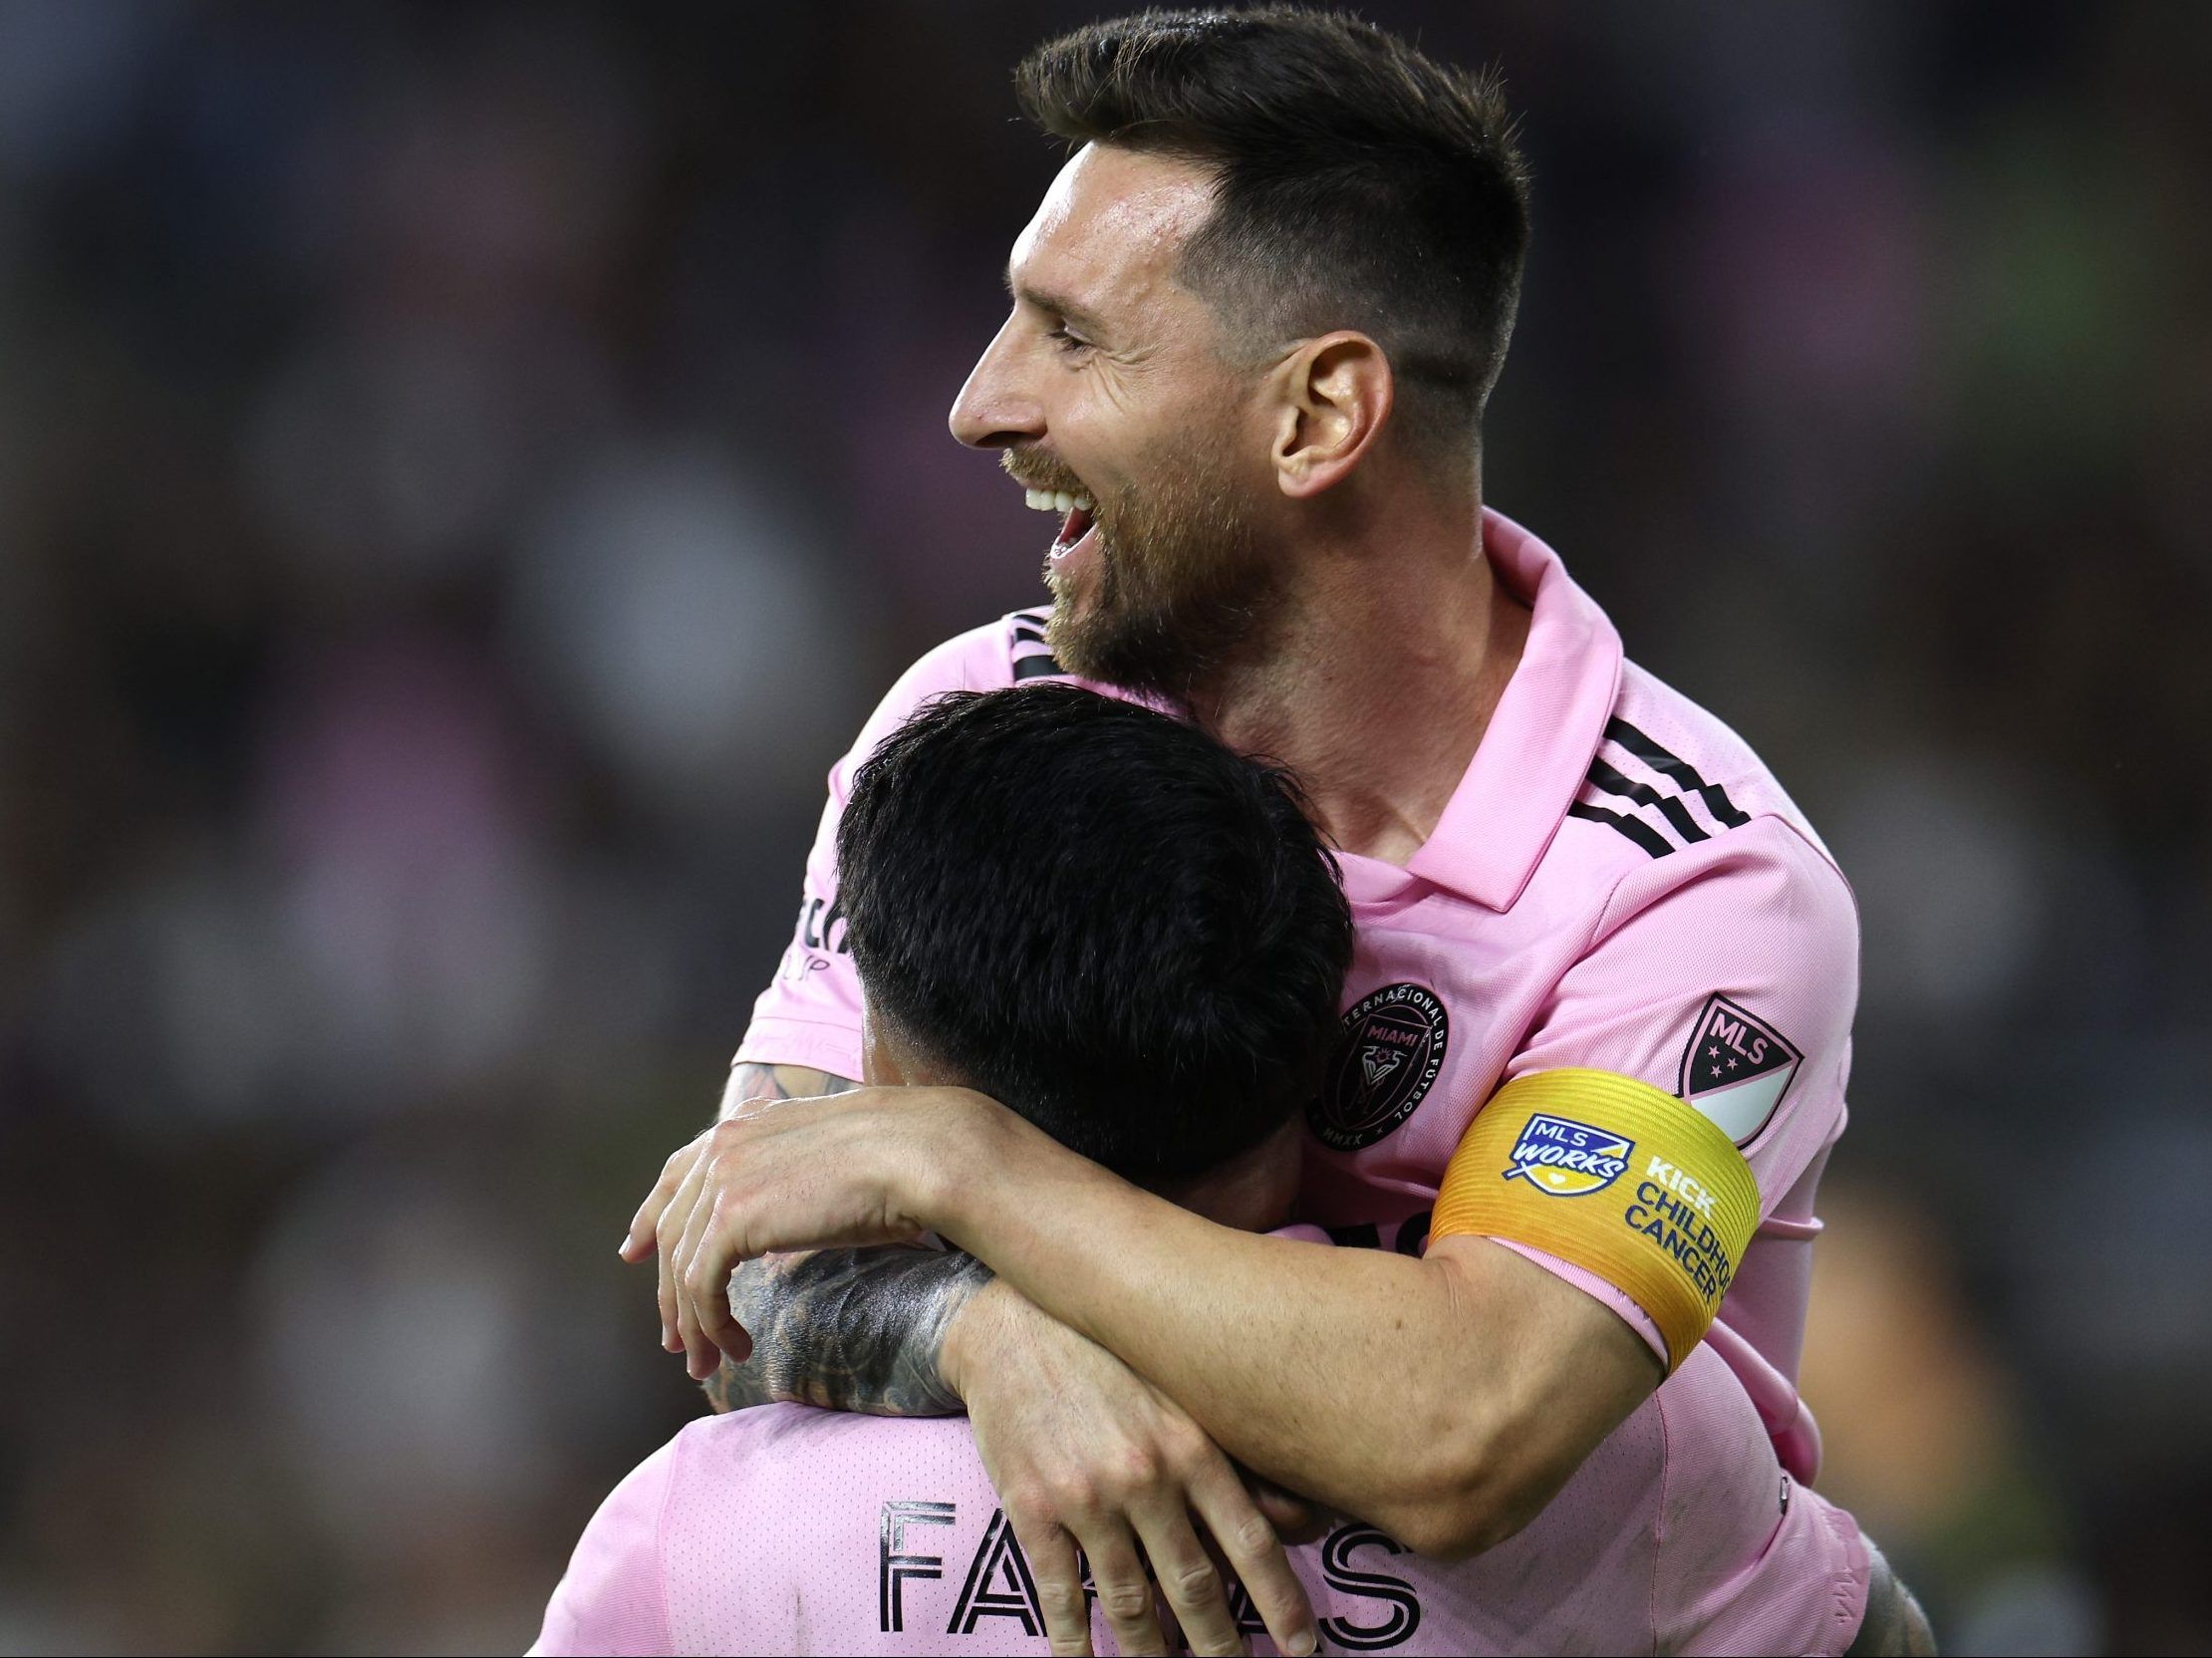 Messi has 2 assists in front of star-studded crowd in Los Angeles as Inter  Miami beats LAFC 3-1